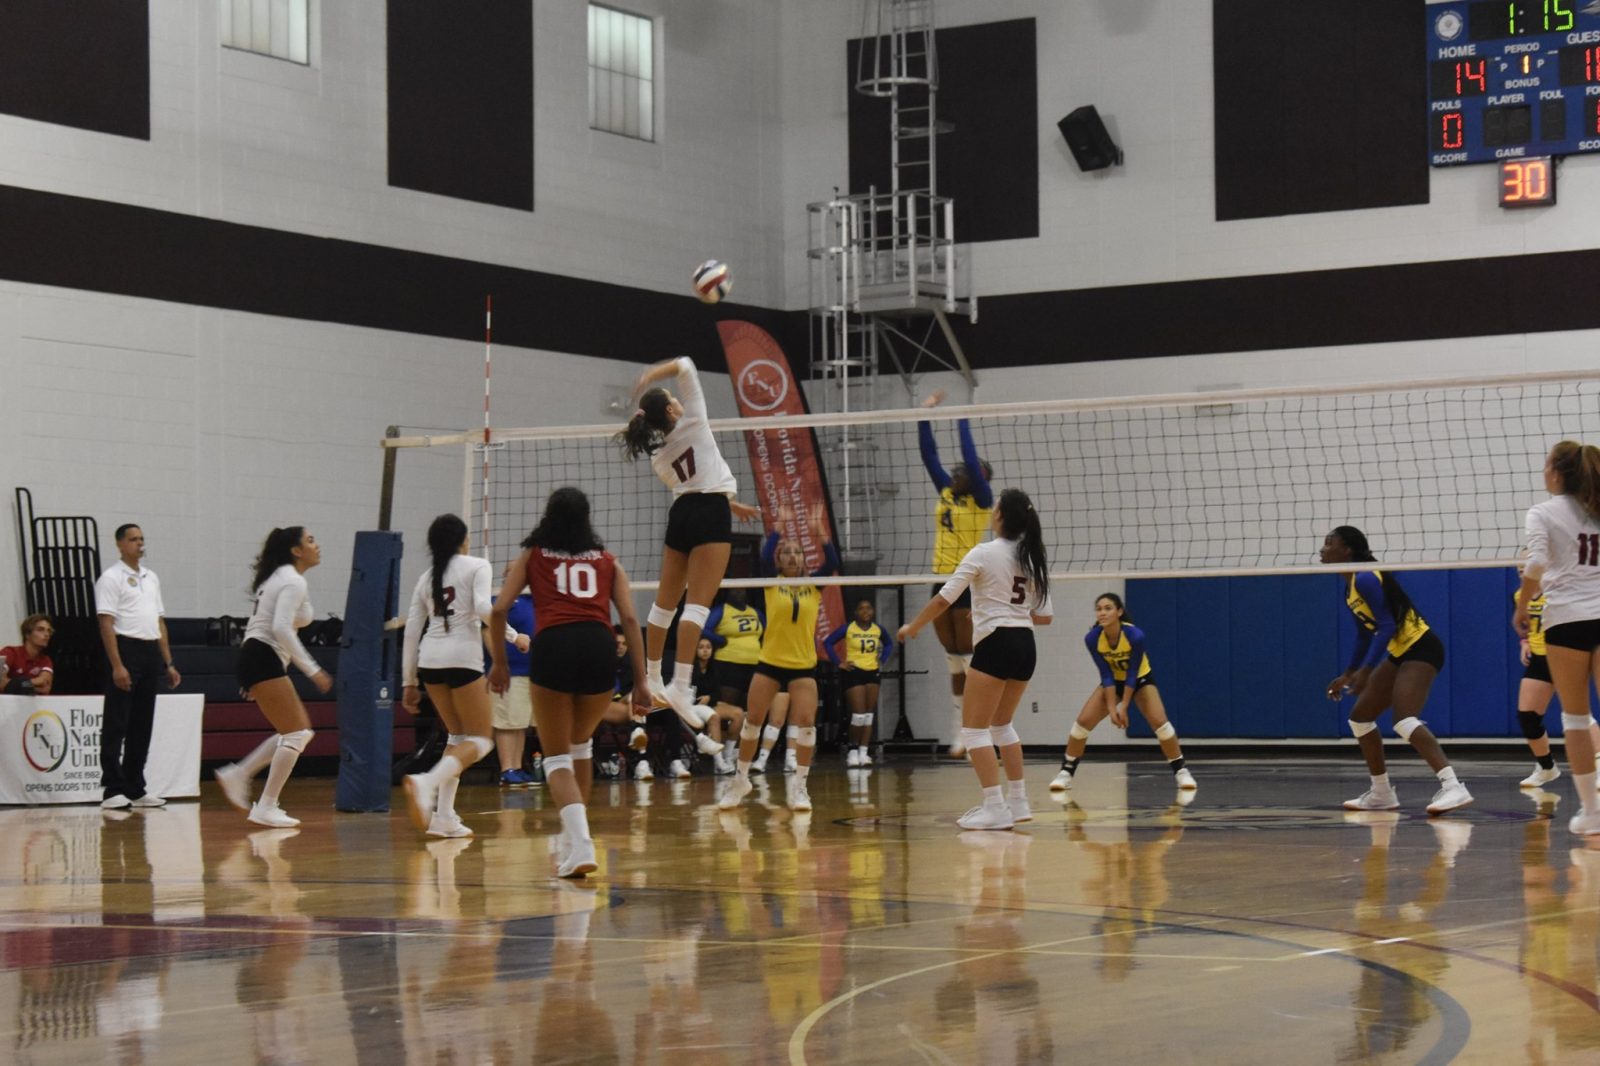 FNU Volleyball player attacking the ball and opponent players trying to block the ball